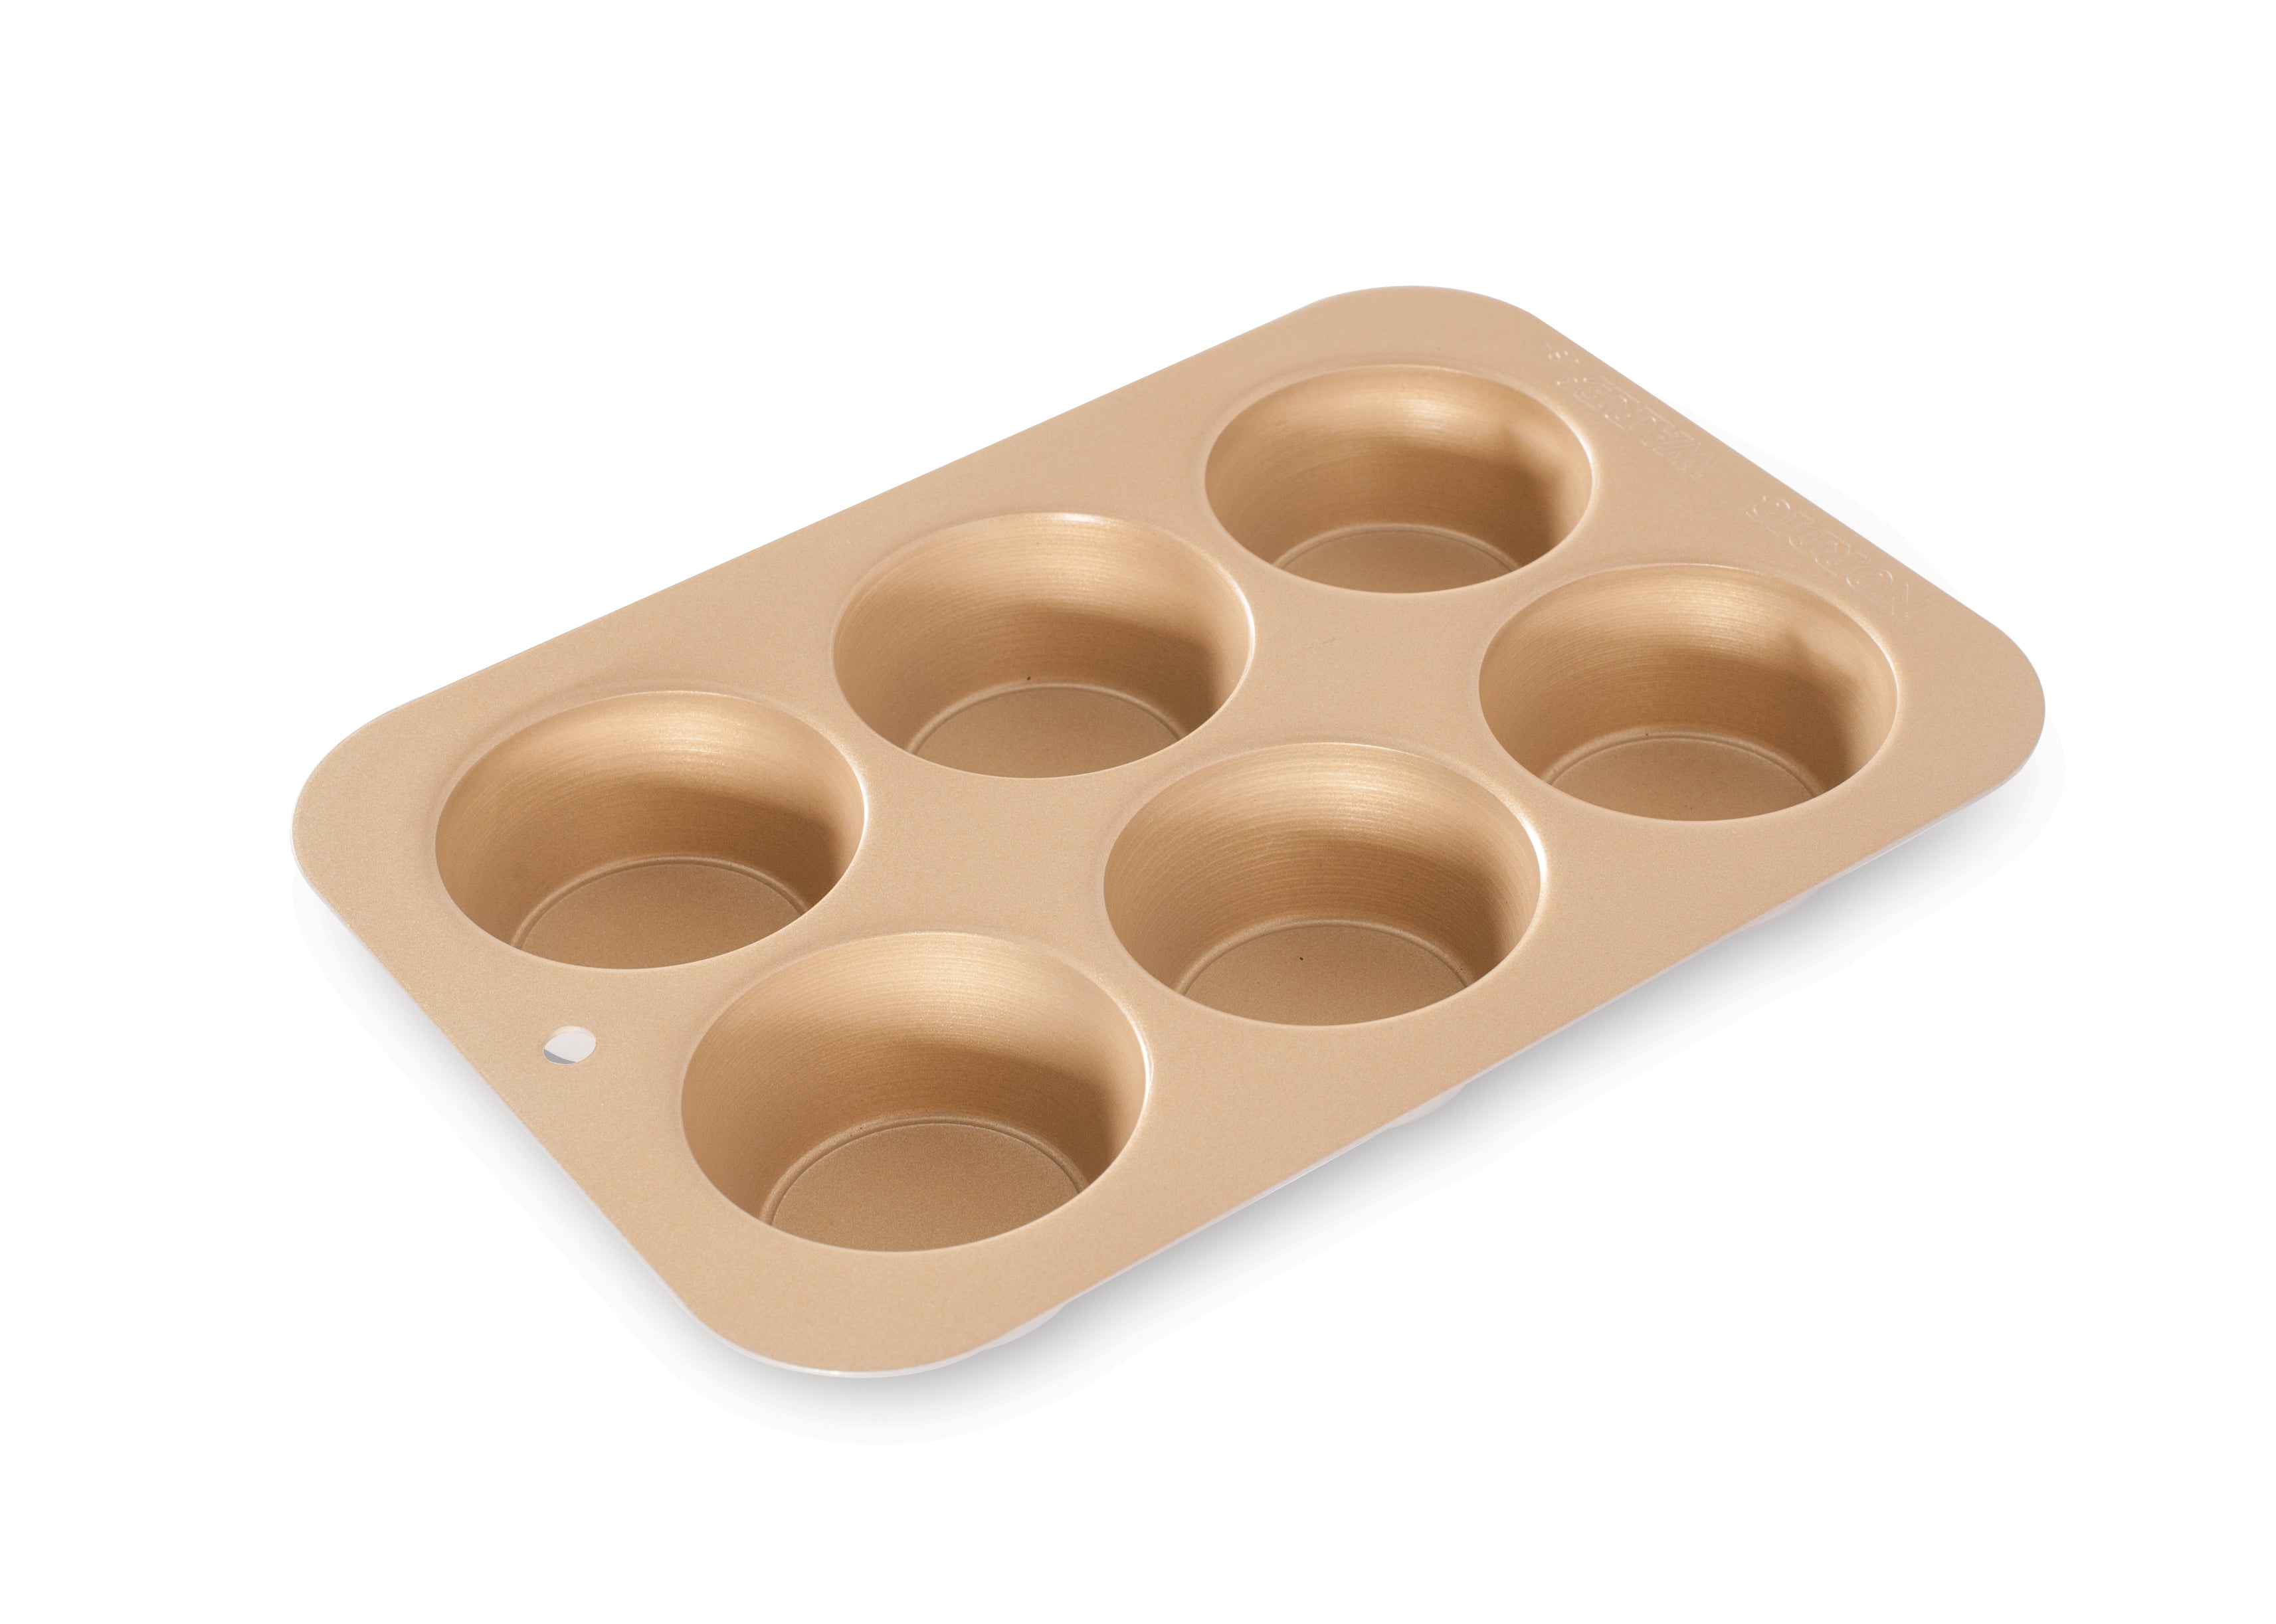 Nordicware 6 Cup Compact Muffin Pan 25.5 x 18 x 3.5cm